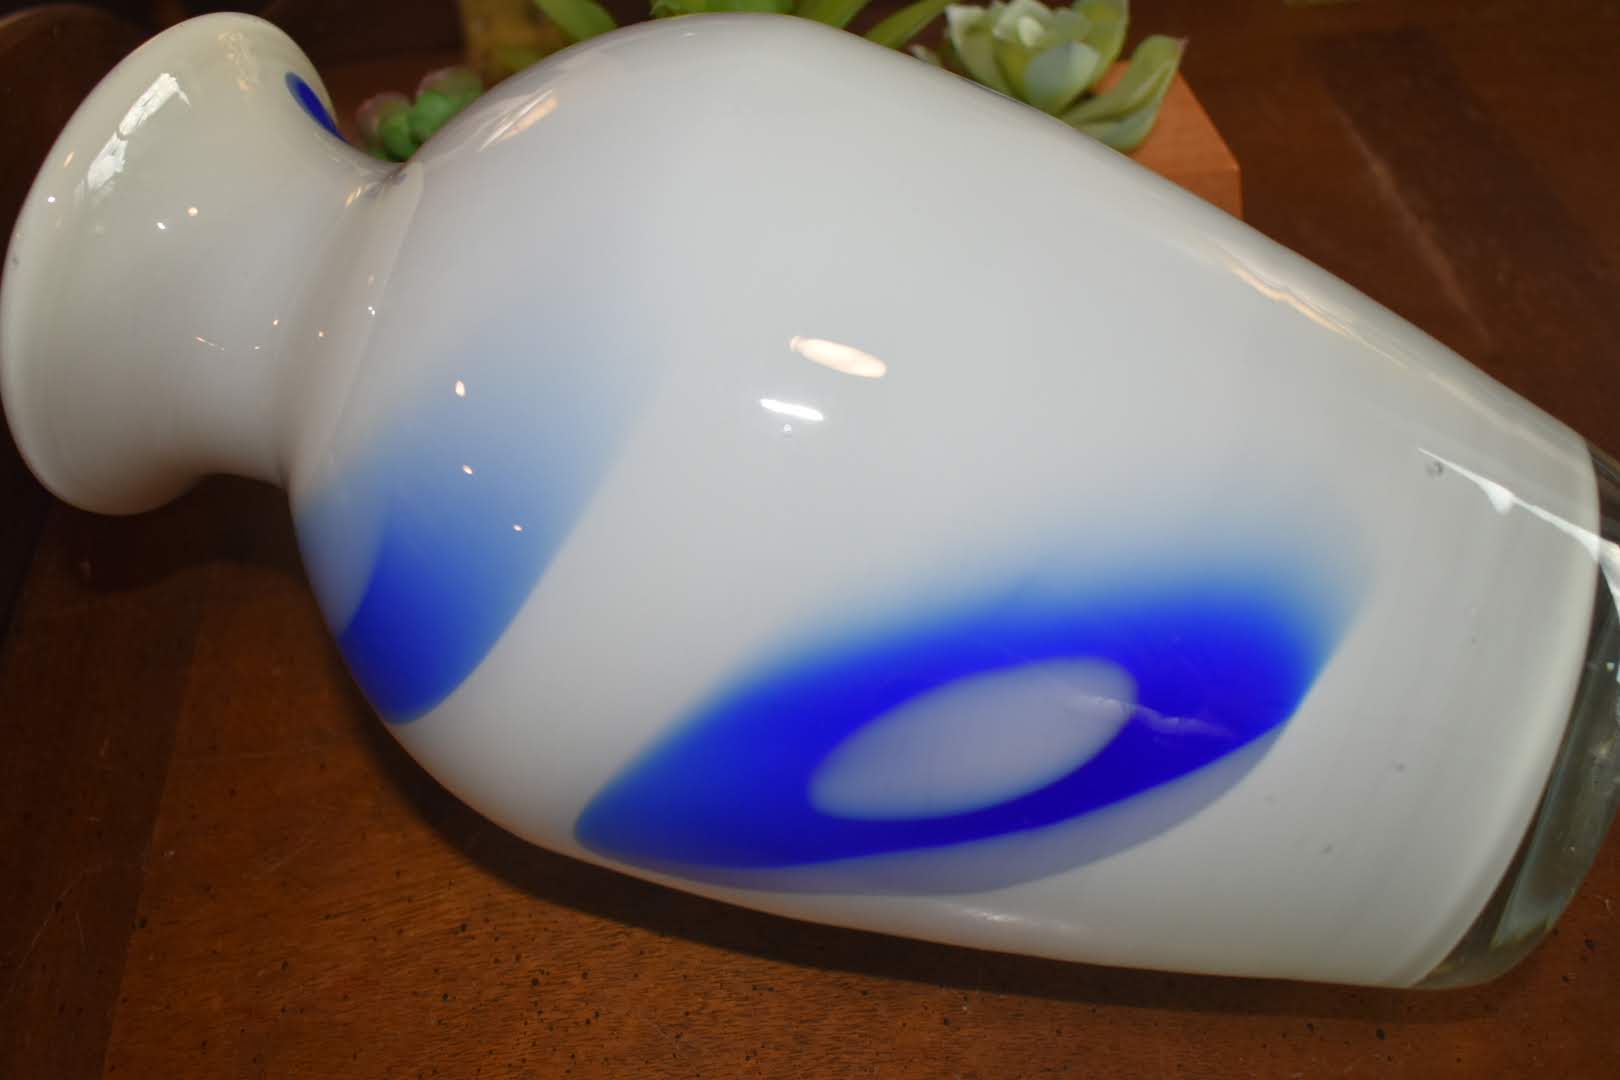 Blown Opaque Glass - White and blue color - Vase Decor - Mid Century